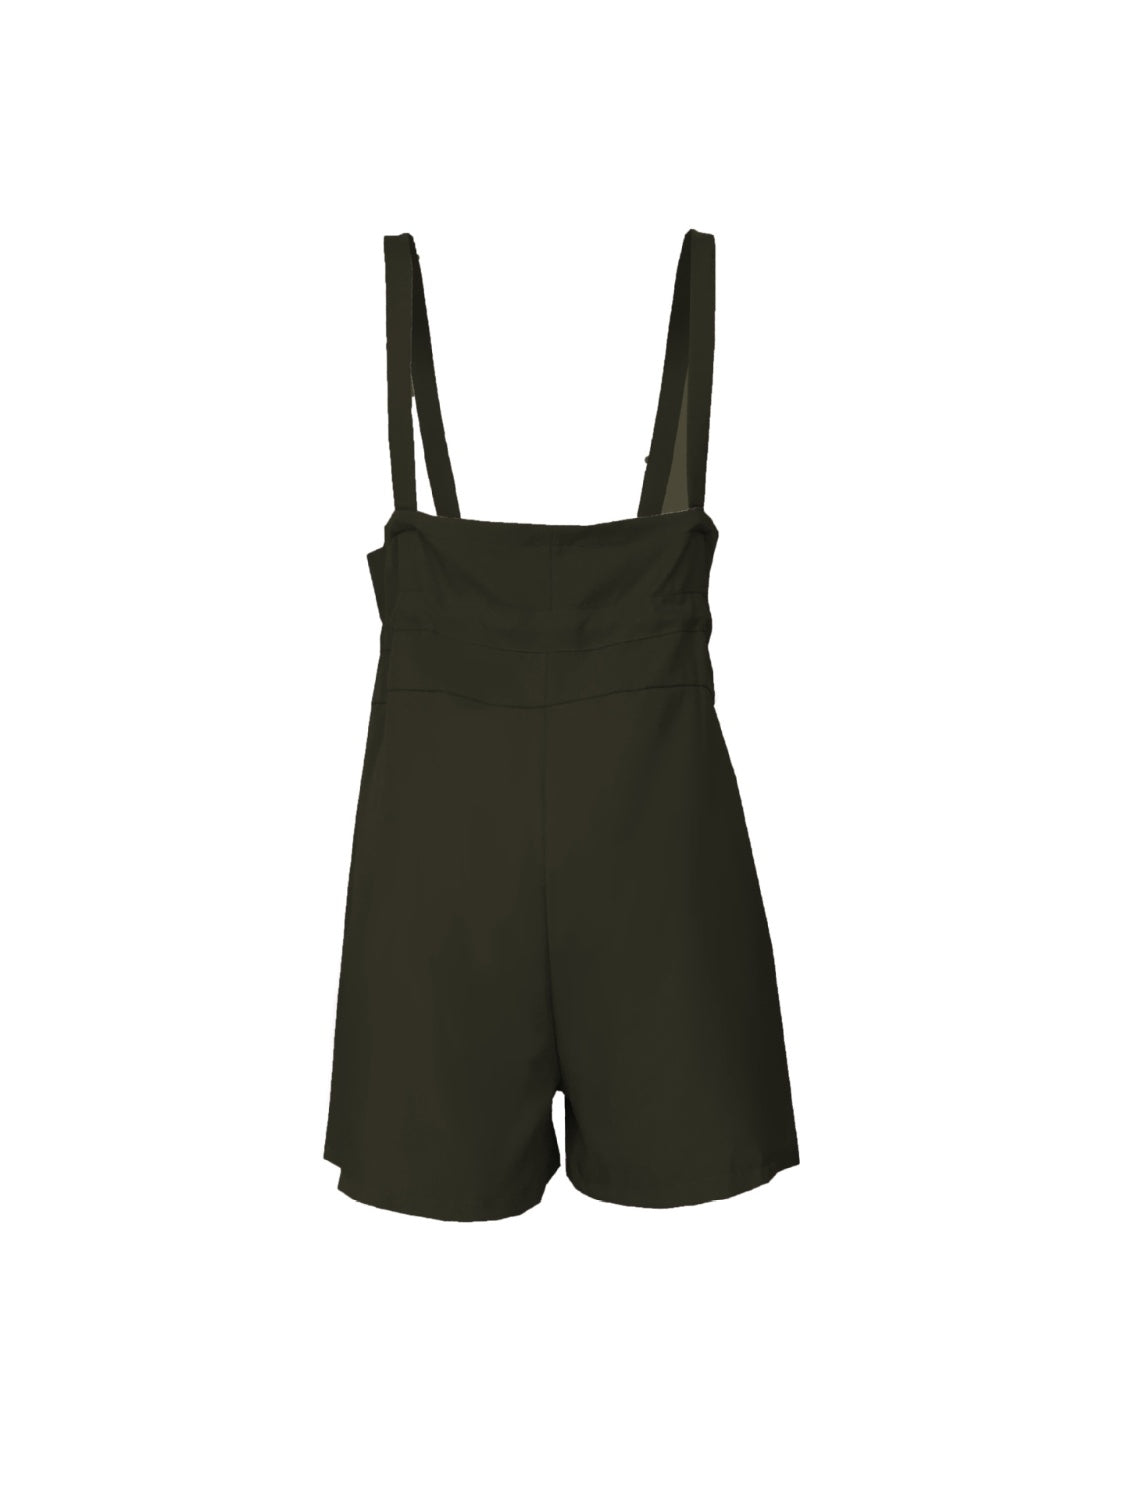 TEEK - Drawstring Pocketed Wide Strap Overalls with Pockets Romper TEEK Trend   